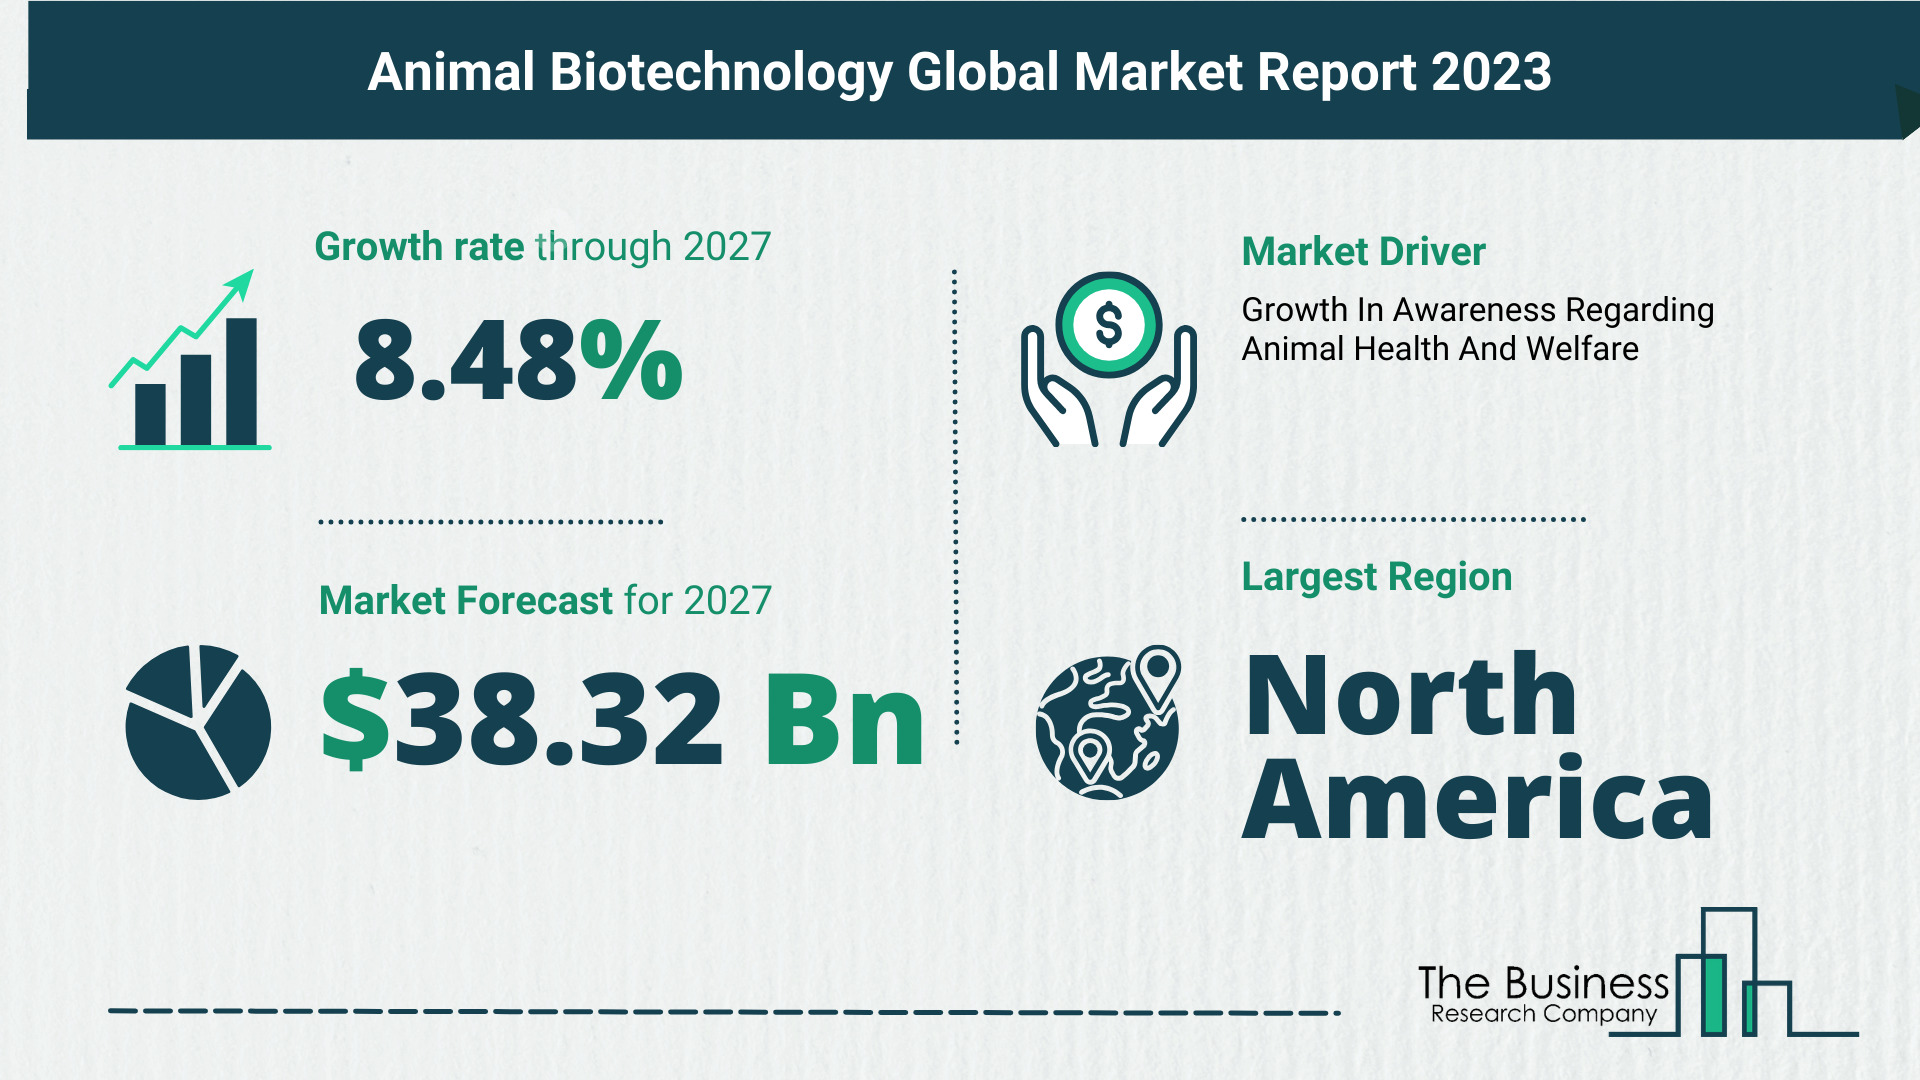 What Is The Forecast Growth Rate For The Animal Biotechnology Market?